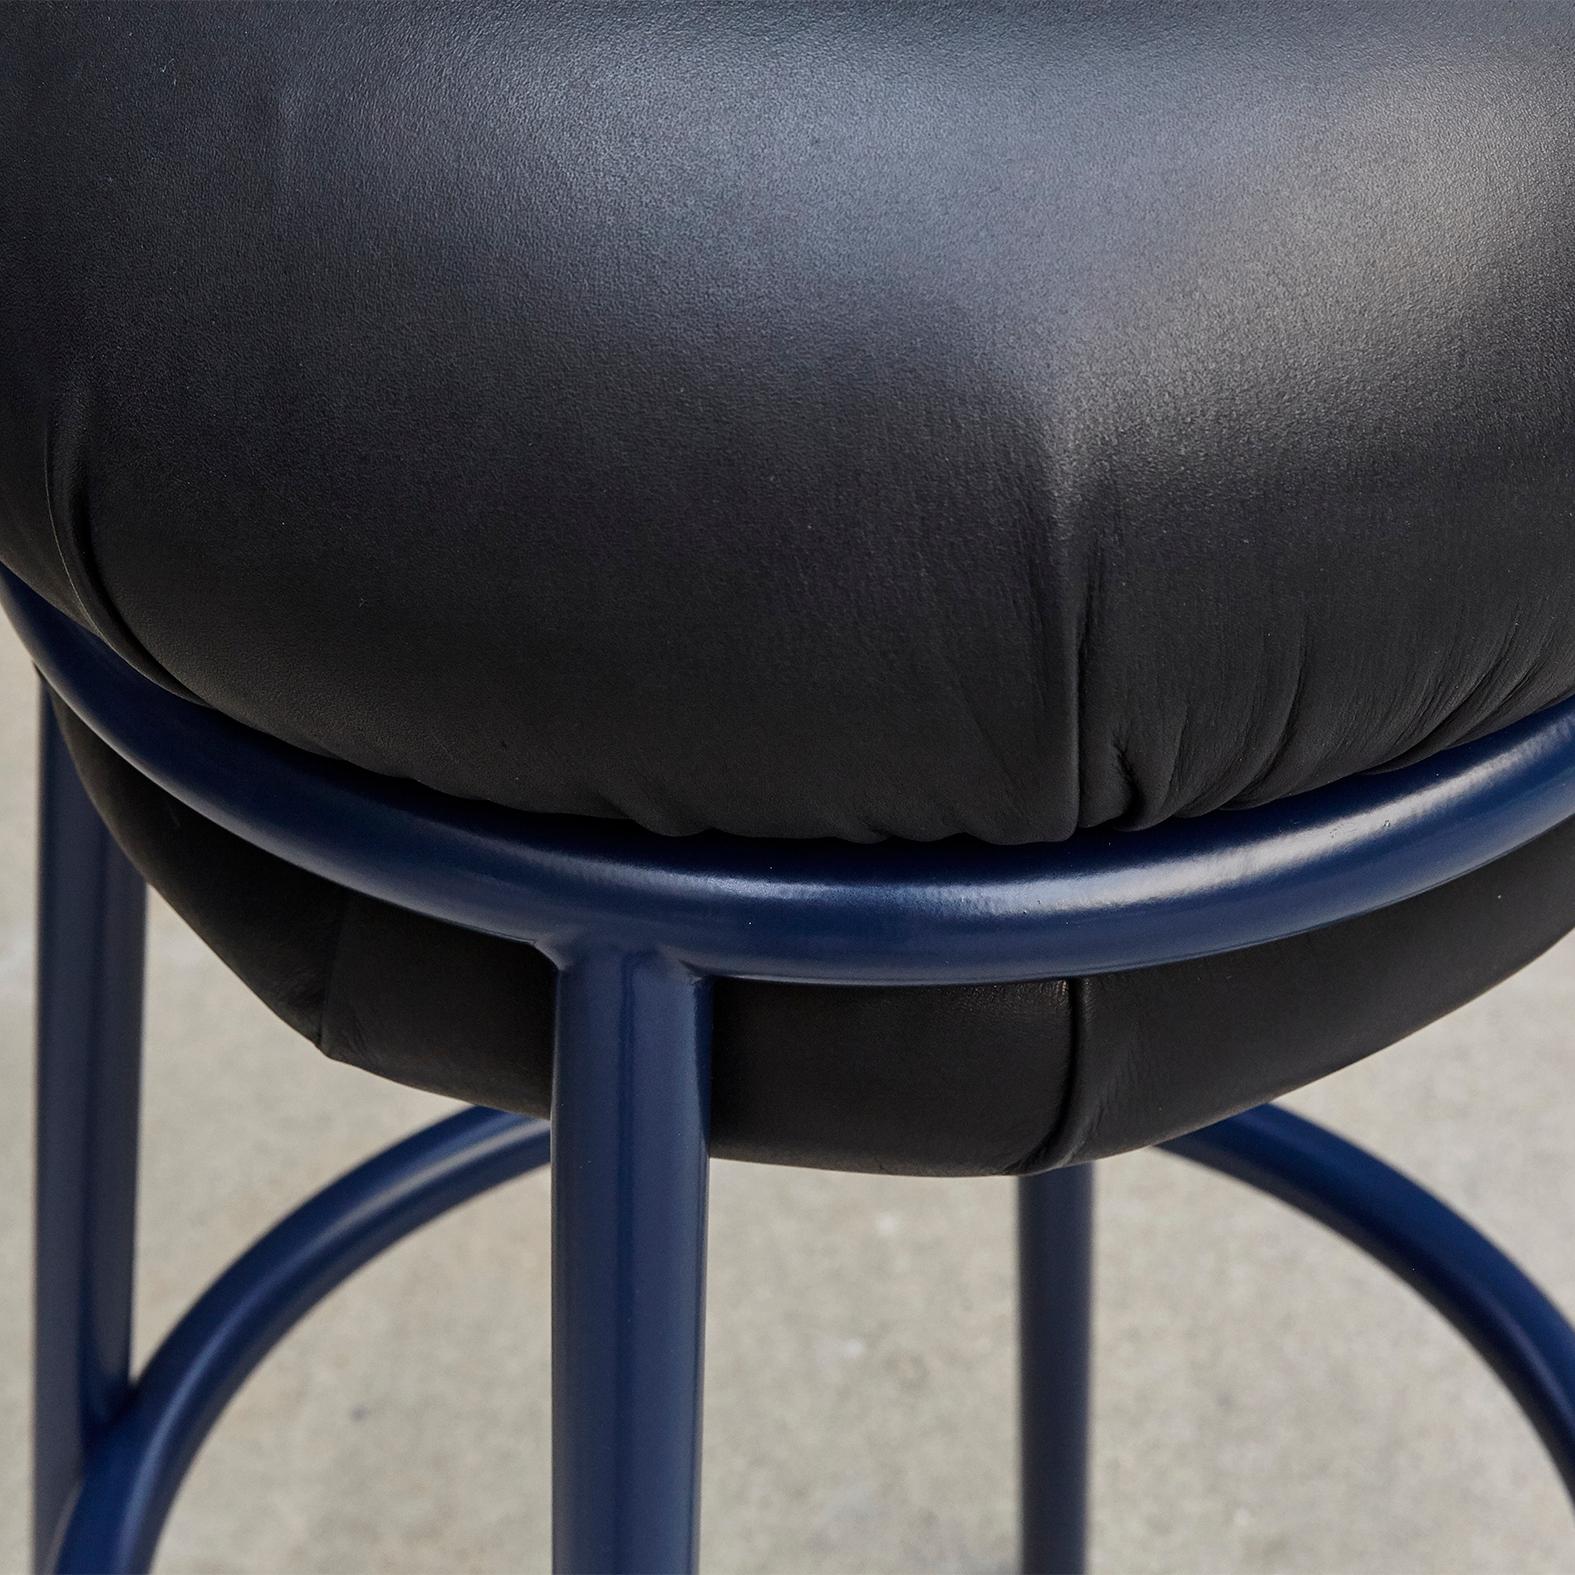 Contemporary Stephen Burks Grasso, Black Leather, Blue Lacquered Metal Stool  For Sale